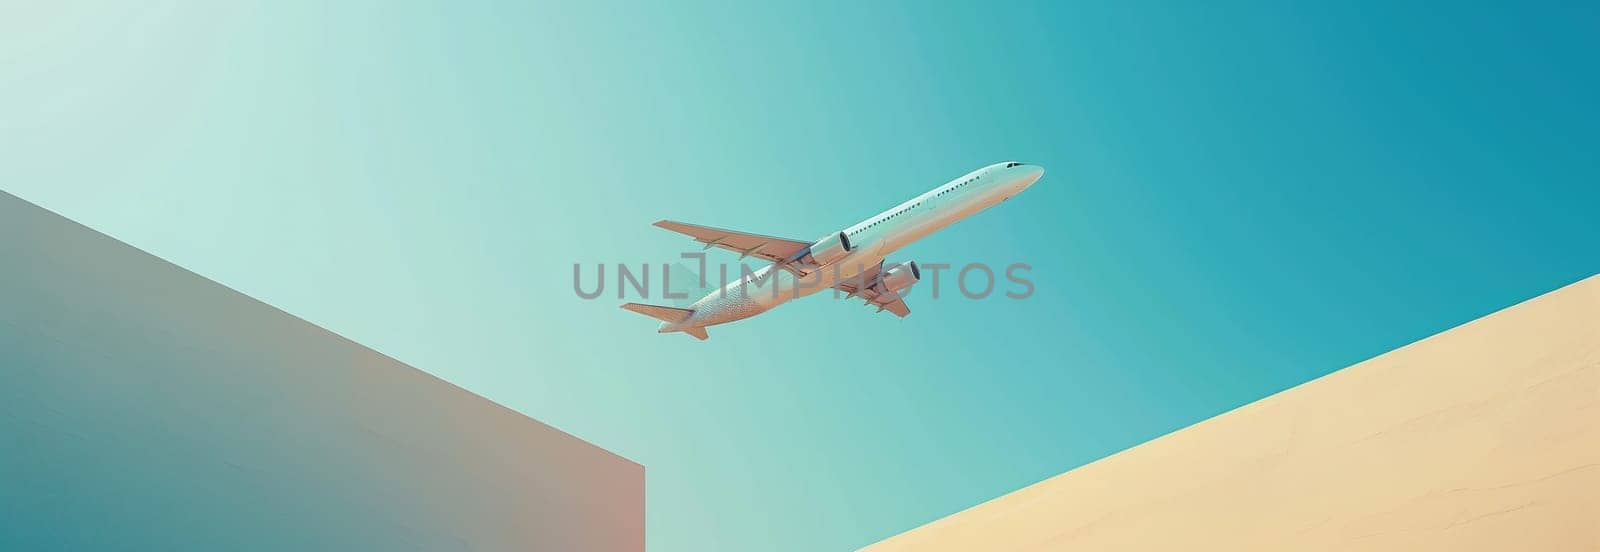 Airplane model on blue background by Andelov13